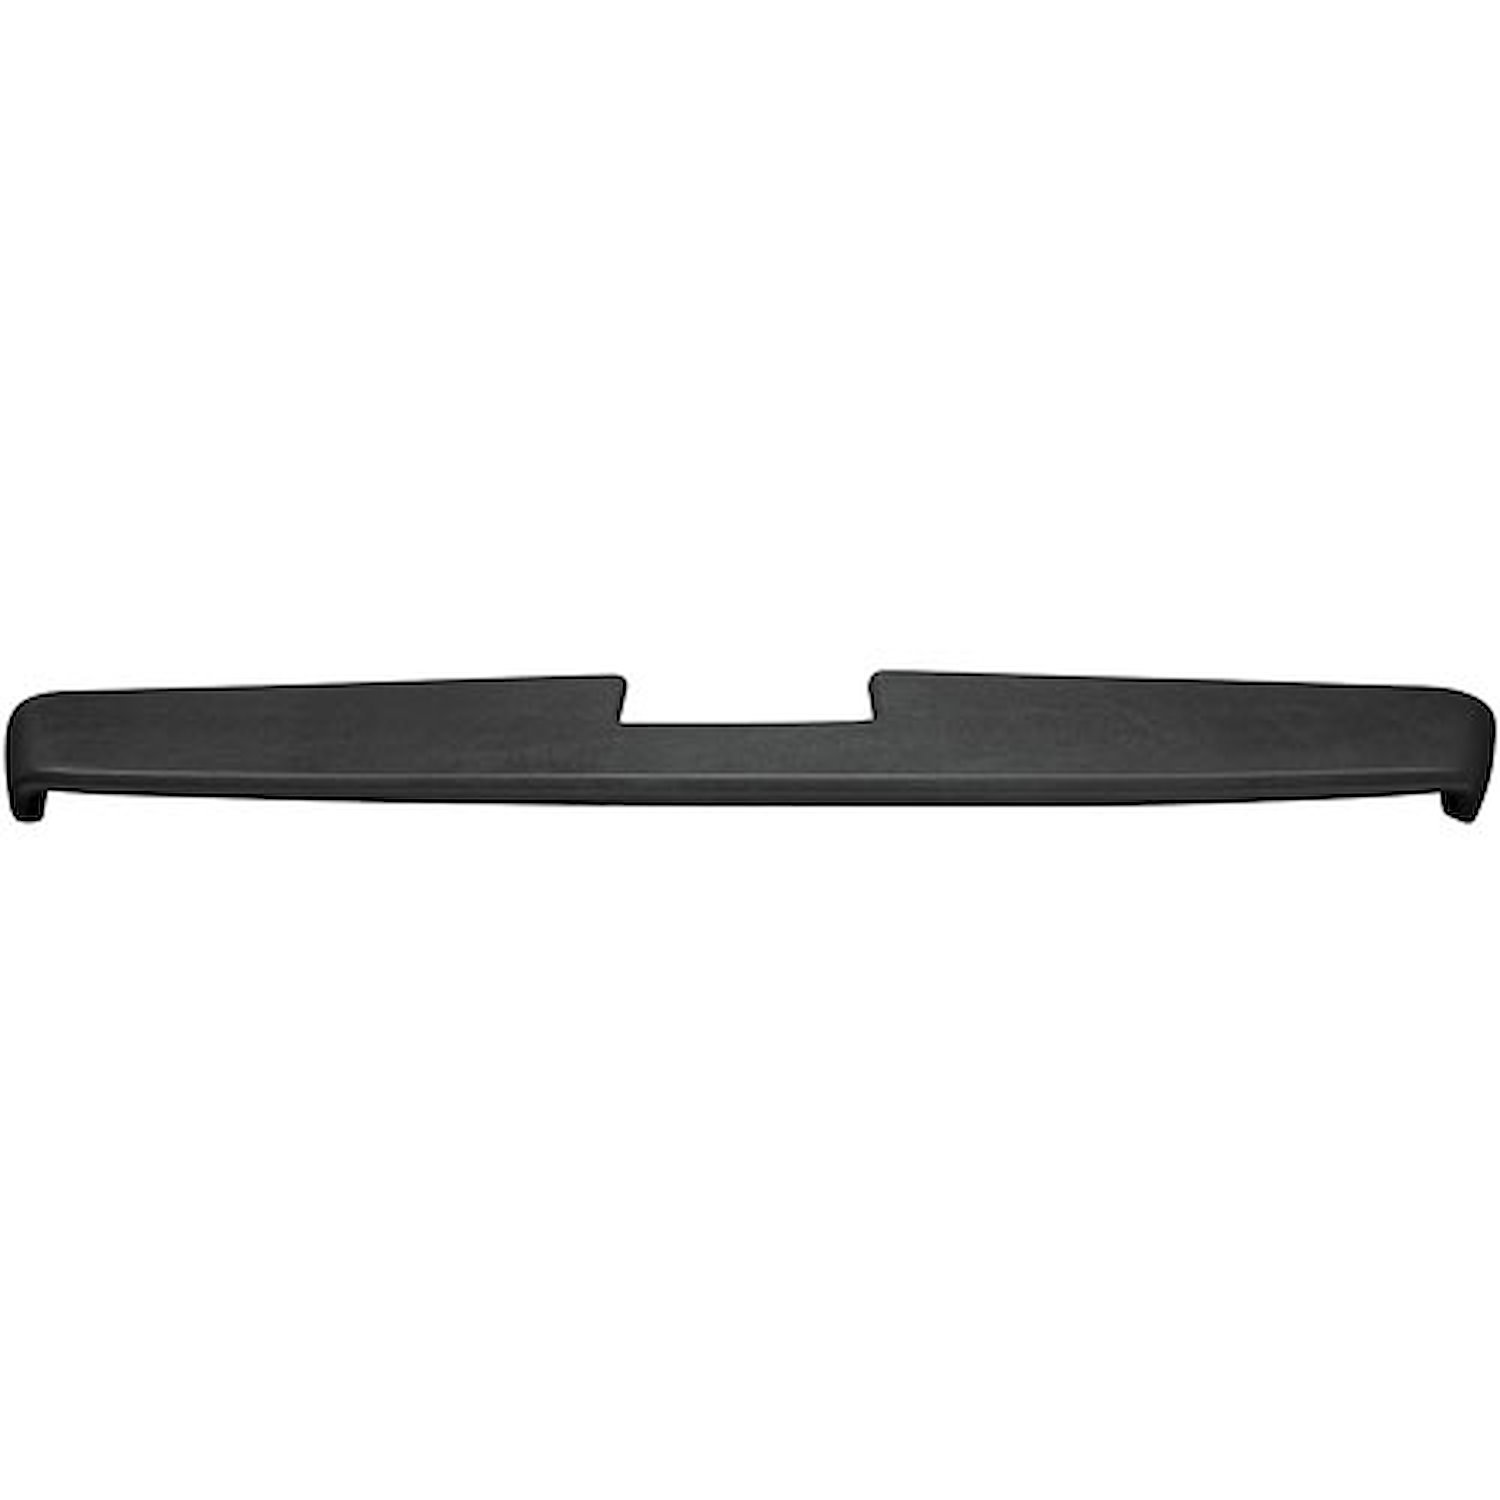 Injection-Molded Urethane Foam Dash Pad 1966 Chevy Chevelle/El Camino